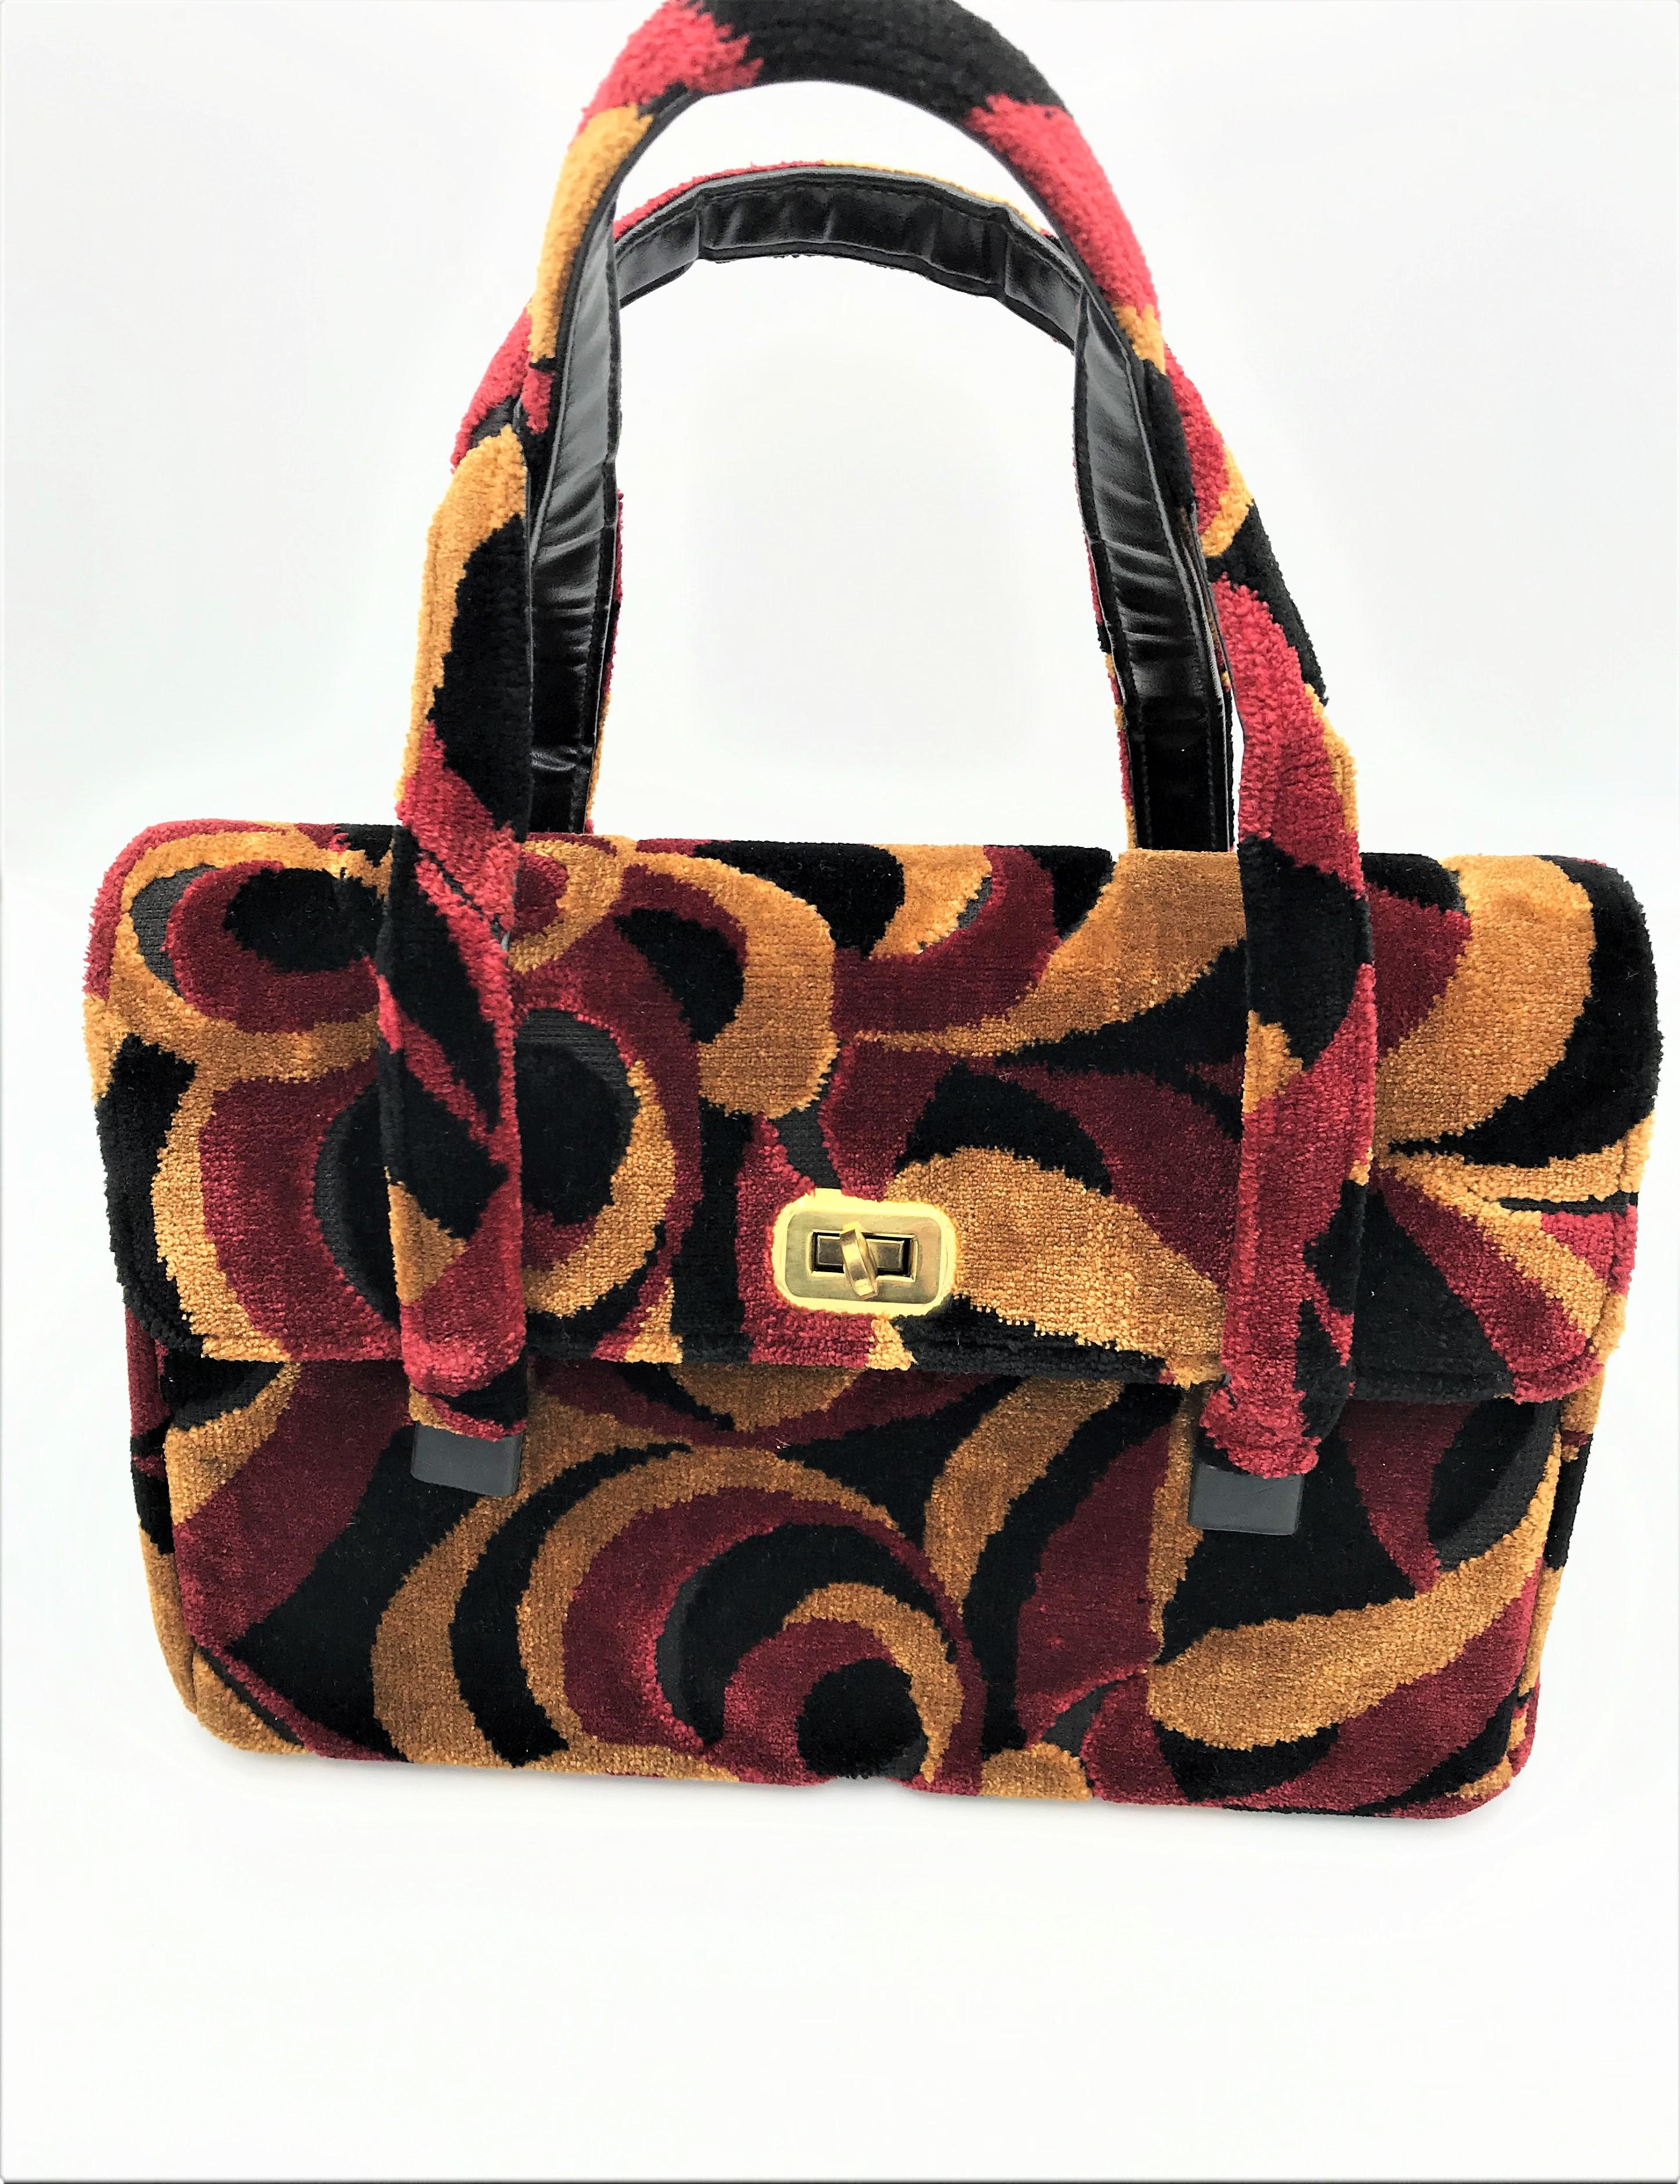 A fun young bag from the USA with 2 handles made of printed velvet. It is lined with black rep on the inside, has a zipper and an open compartment opposite. It is located under the zipper compartment with a gold sticker that says 